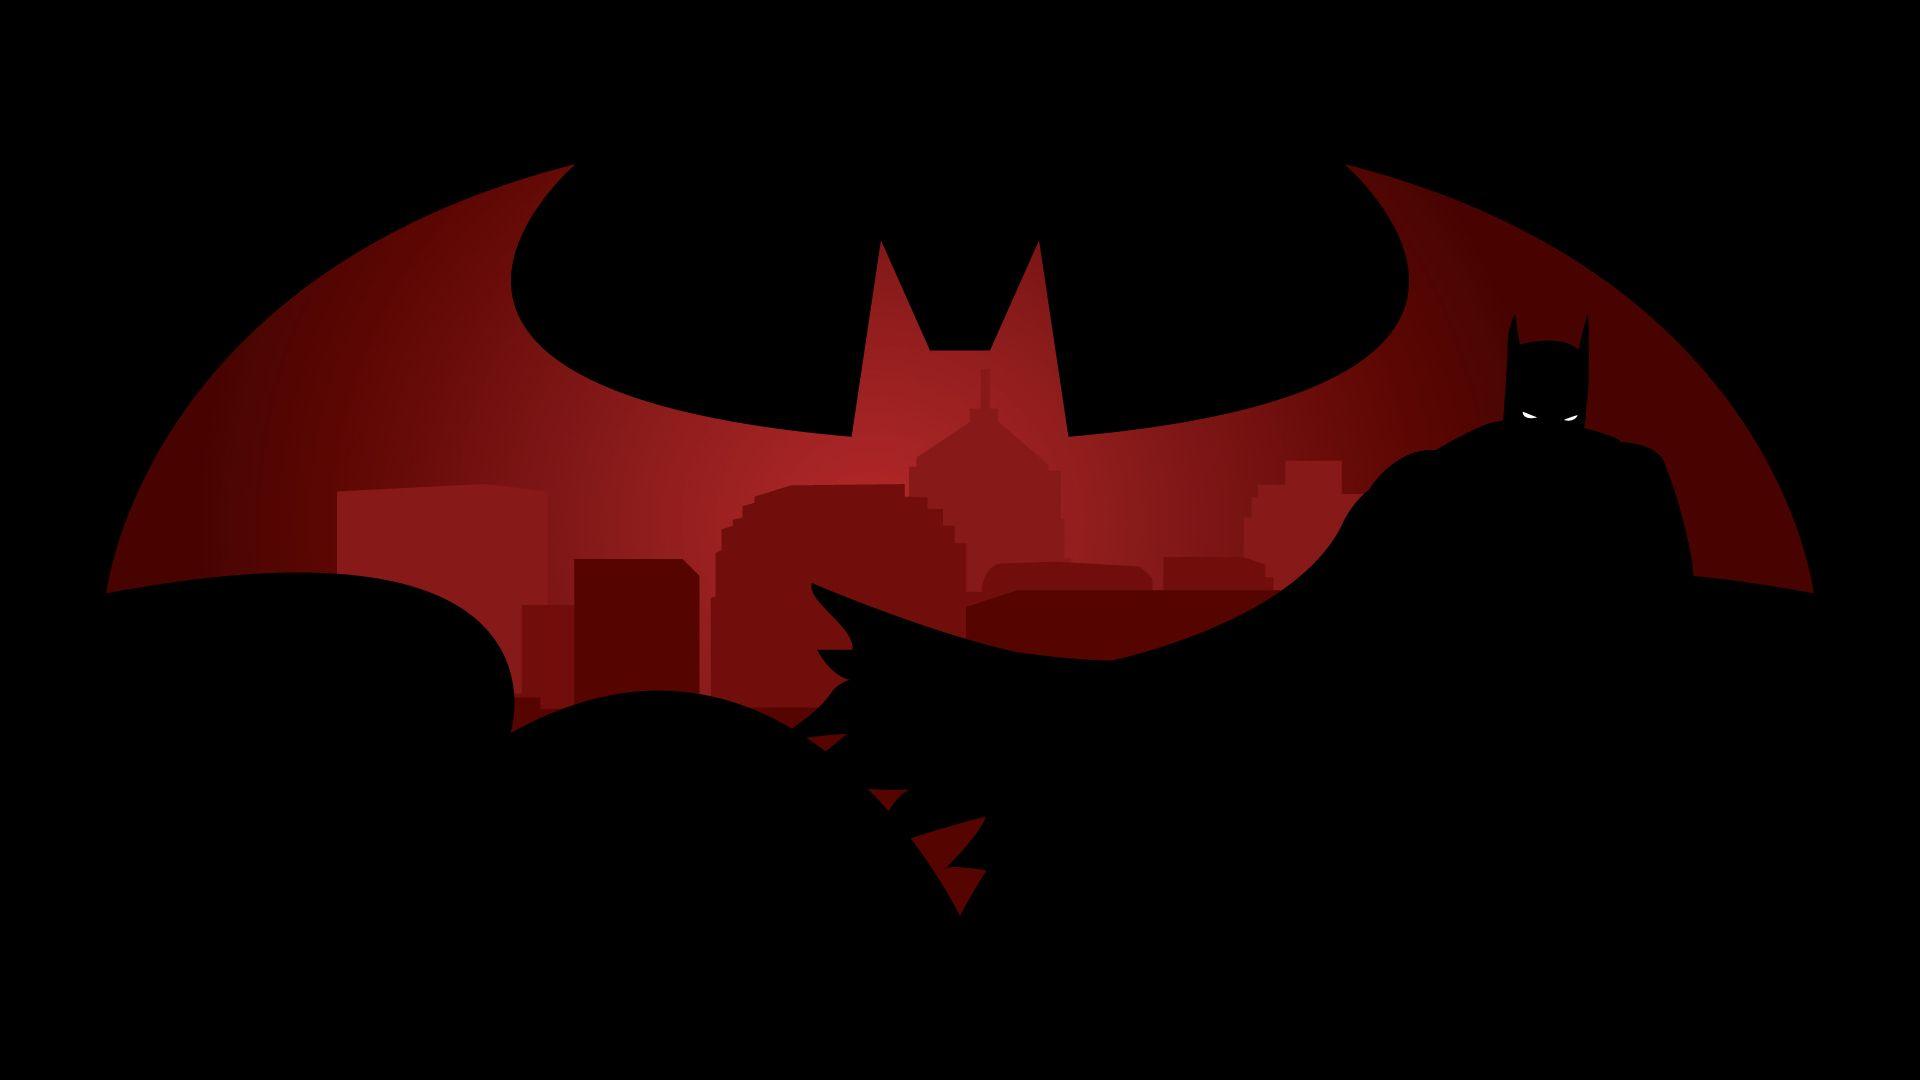 Black and Red Batman Logo - I just put this design together. Any thoughts?